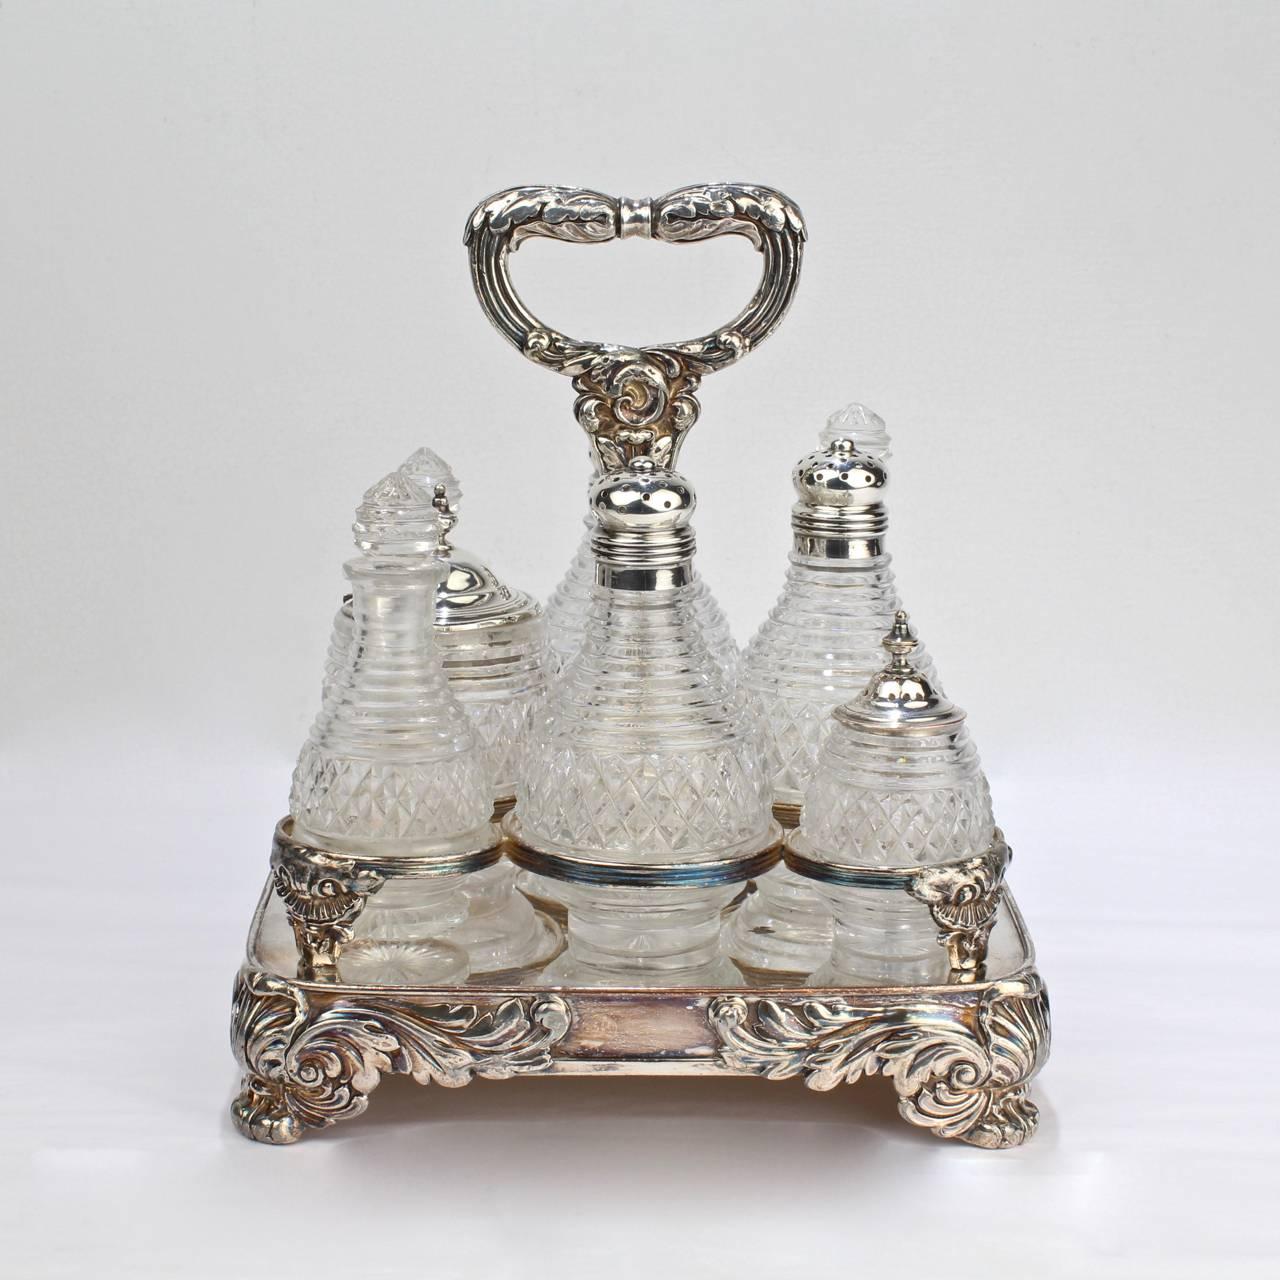 A rare English George III Old Sheffield plate cruet stand with cut-glass bottles by Matthew Boulton.

Consisting of three stoppered bottles, three bottles with pierced shaker tops, and two lidded jars each in a ringed section of the silver plated